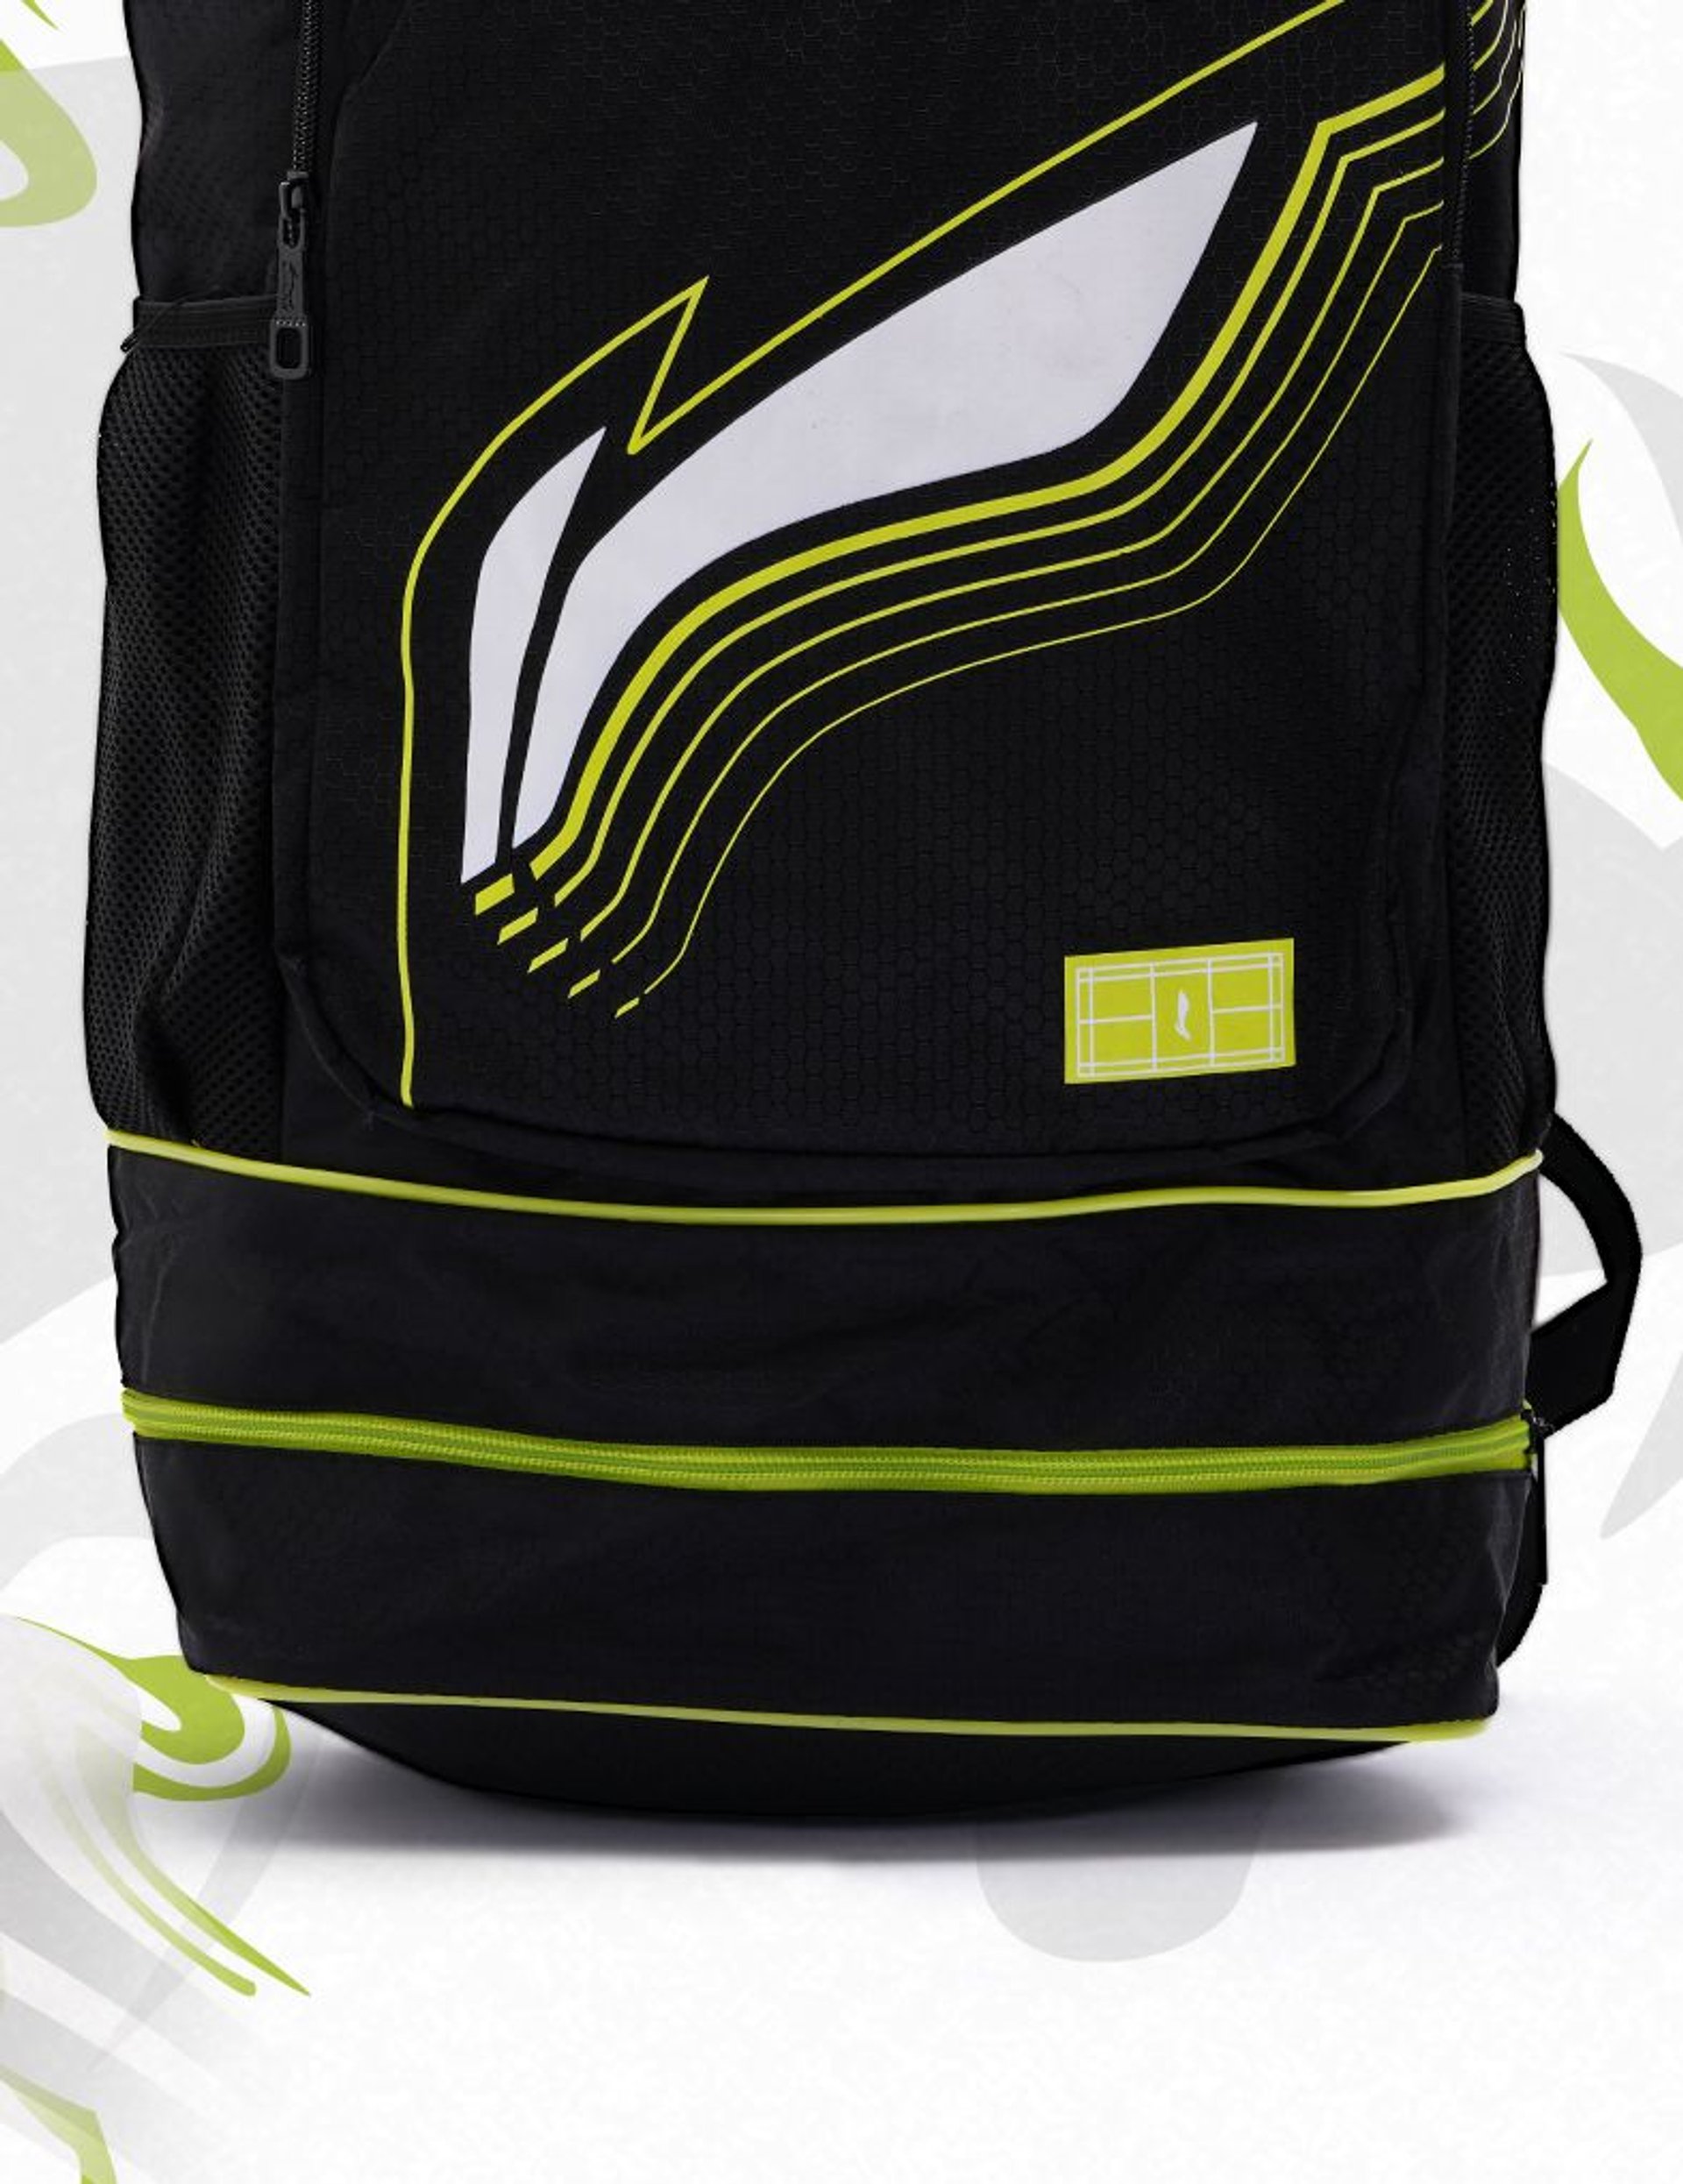 Court Pro Backpack - Multiple feature pockets